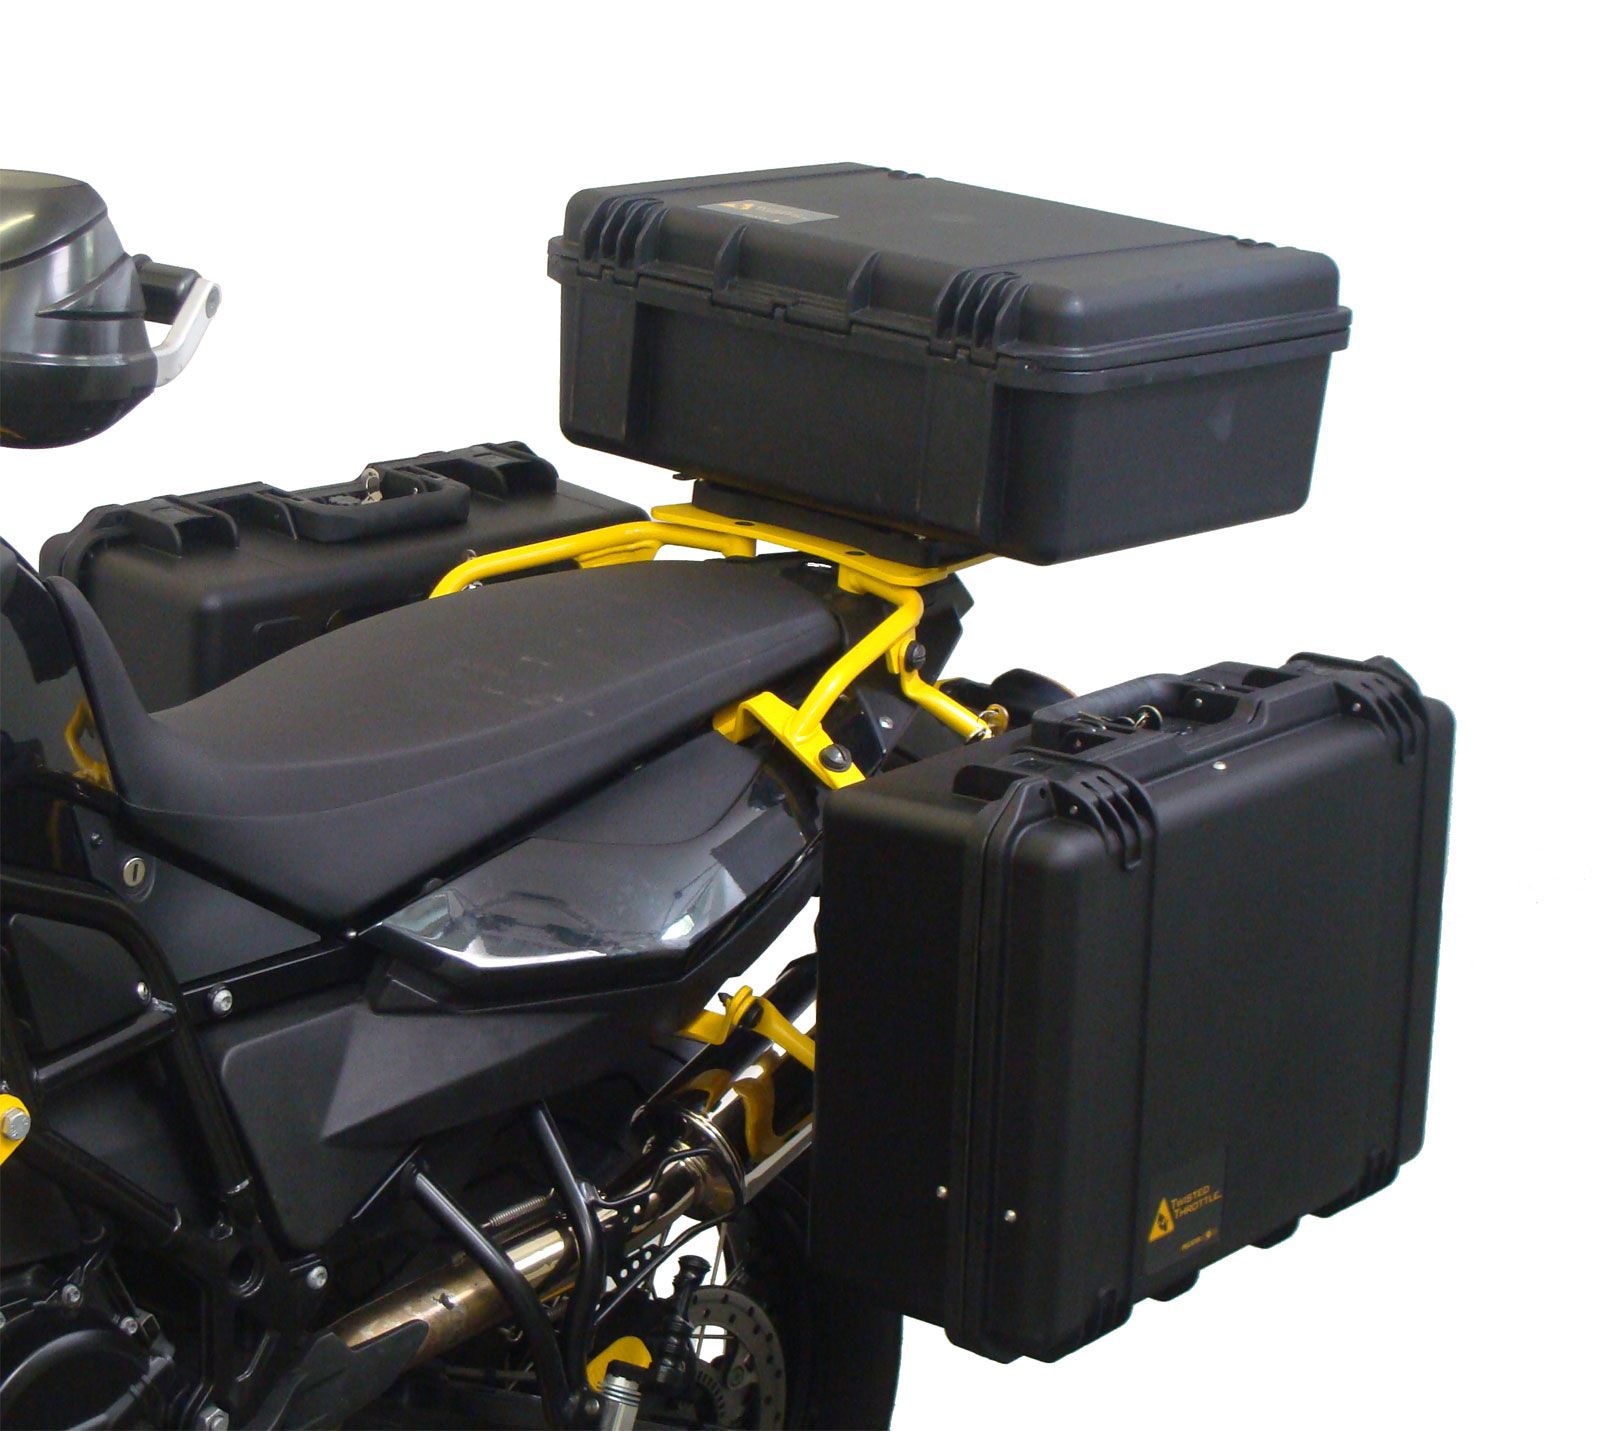 Twisted Throttle Releases the Pelican Storm iM2600 | Motorcyclist